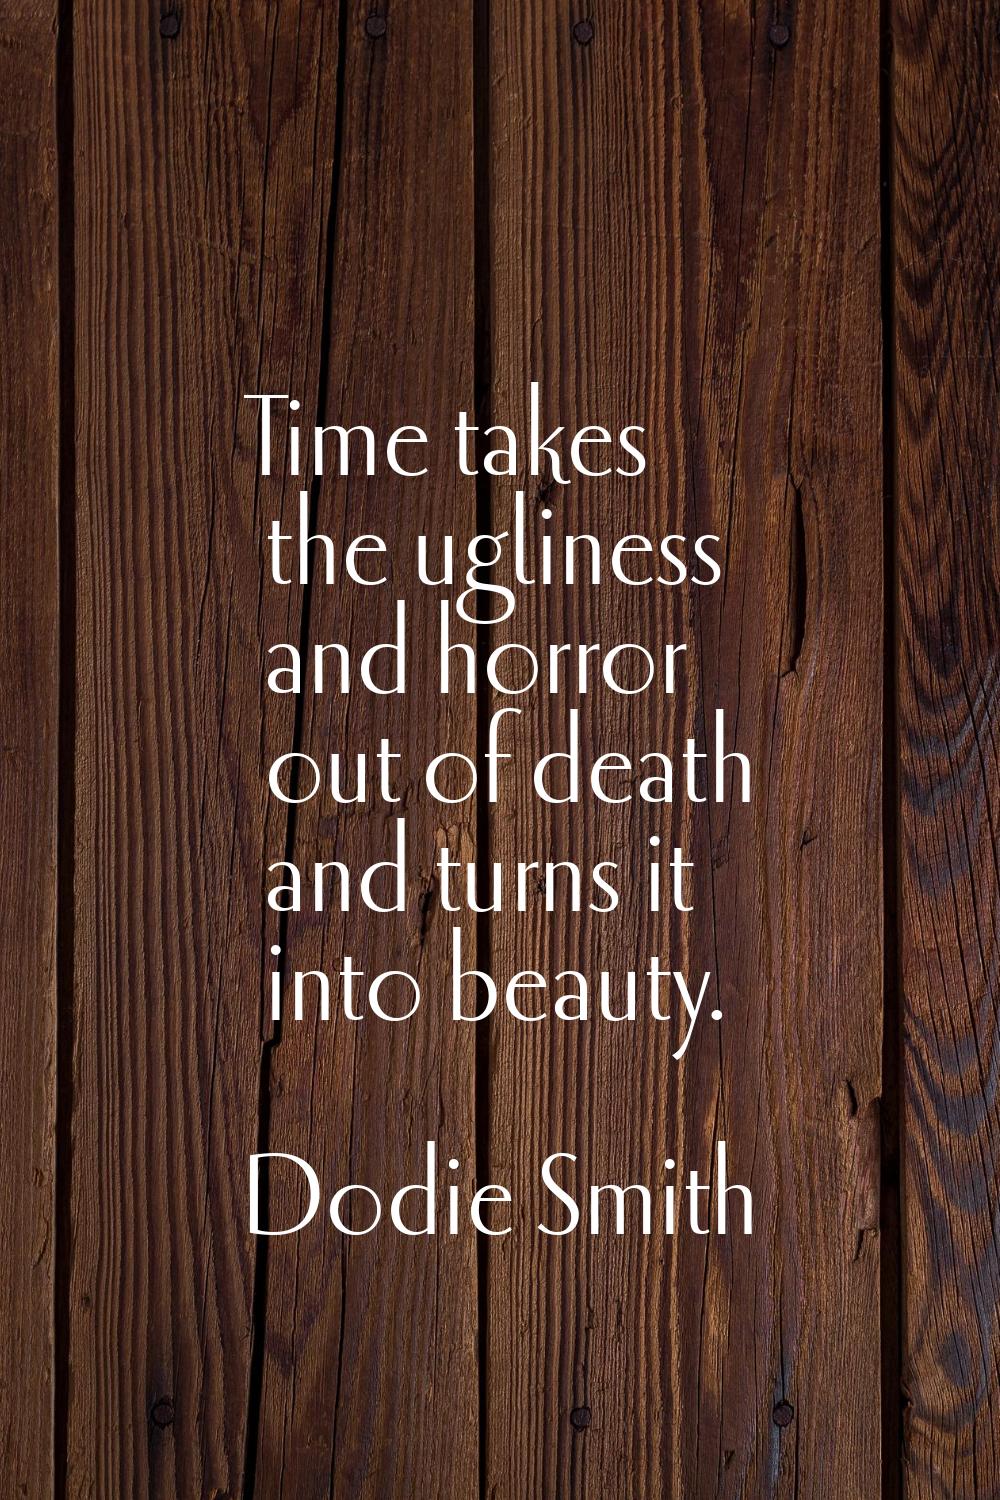 Time takes the ugliness and horror out of death and turns it into beauty.